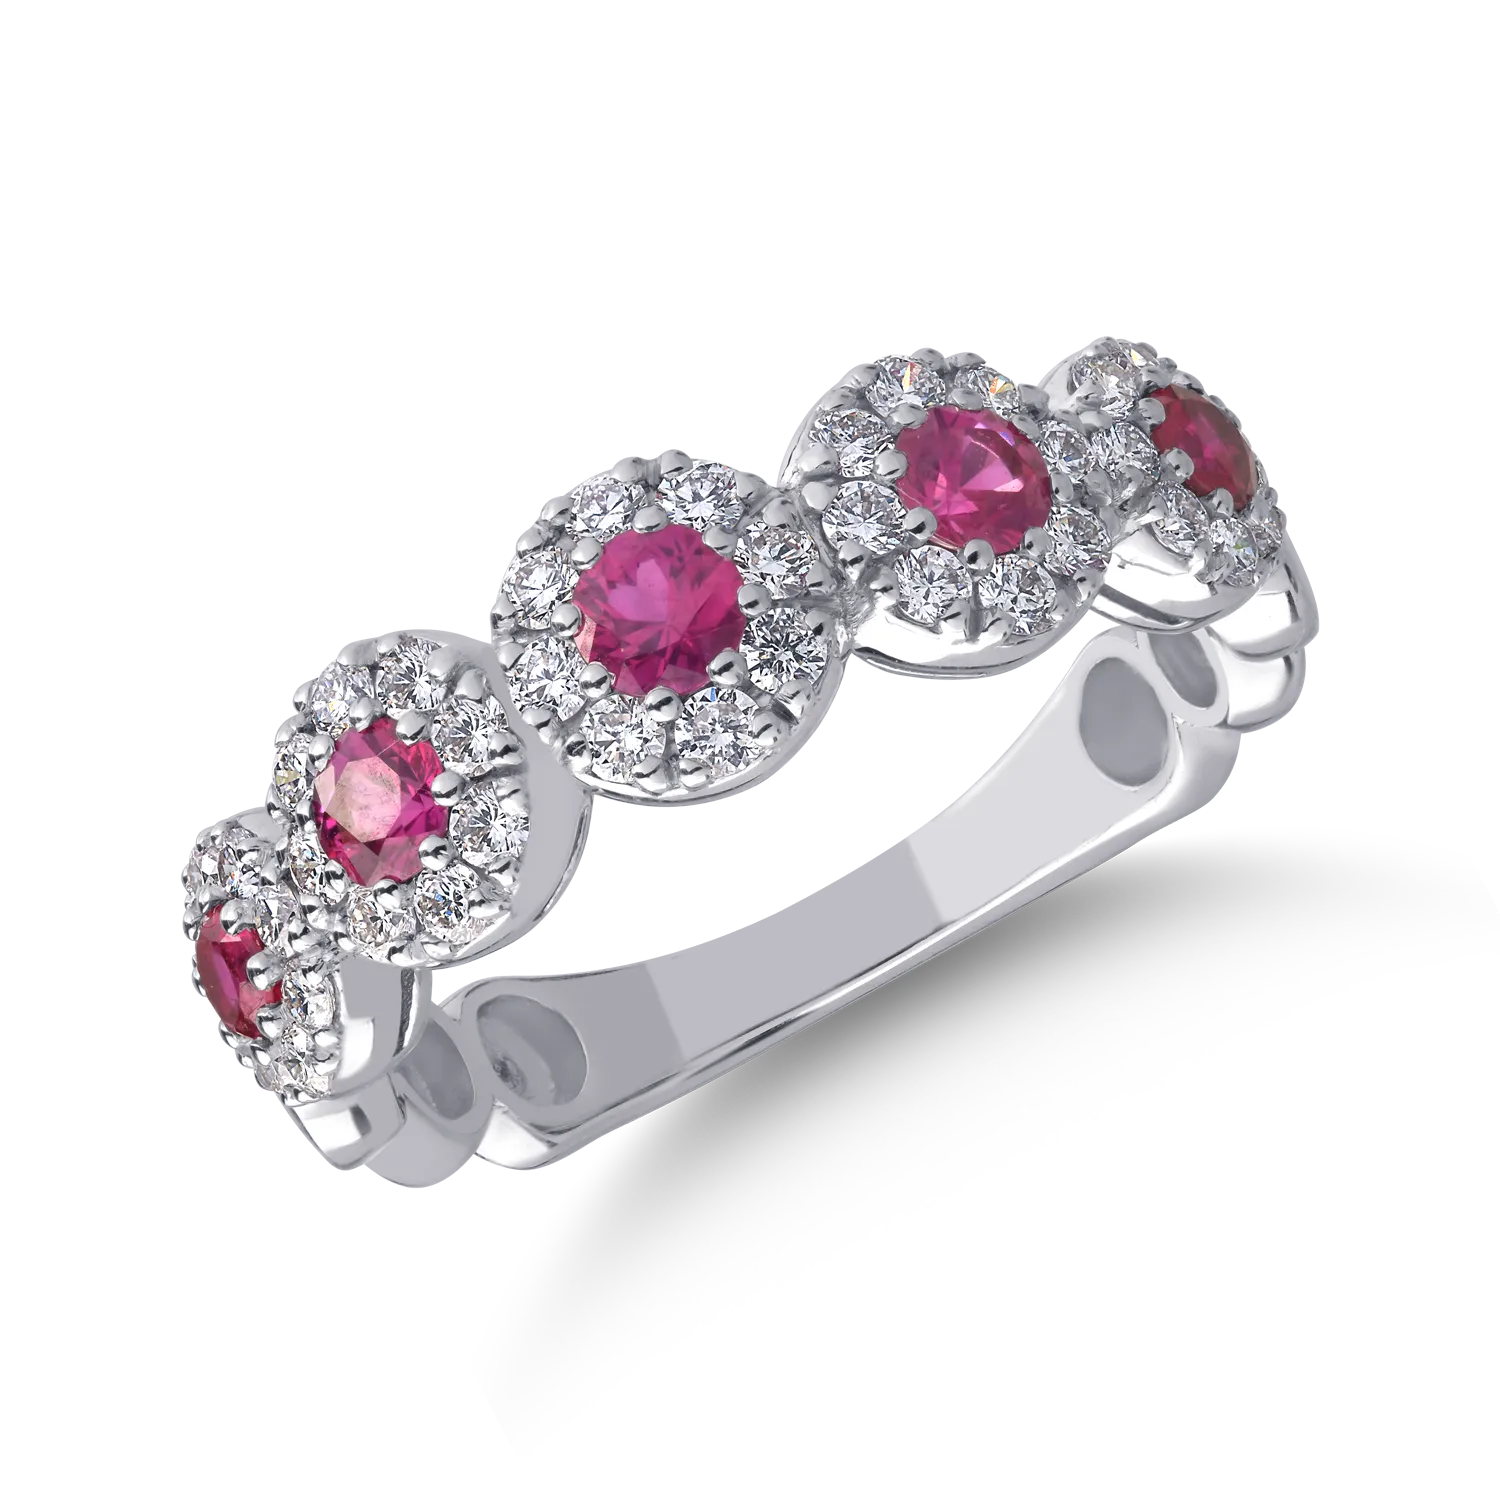 18K white gold ring with 0.58ct rubies and 0.54ct diamonds